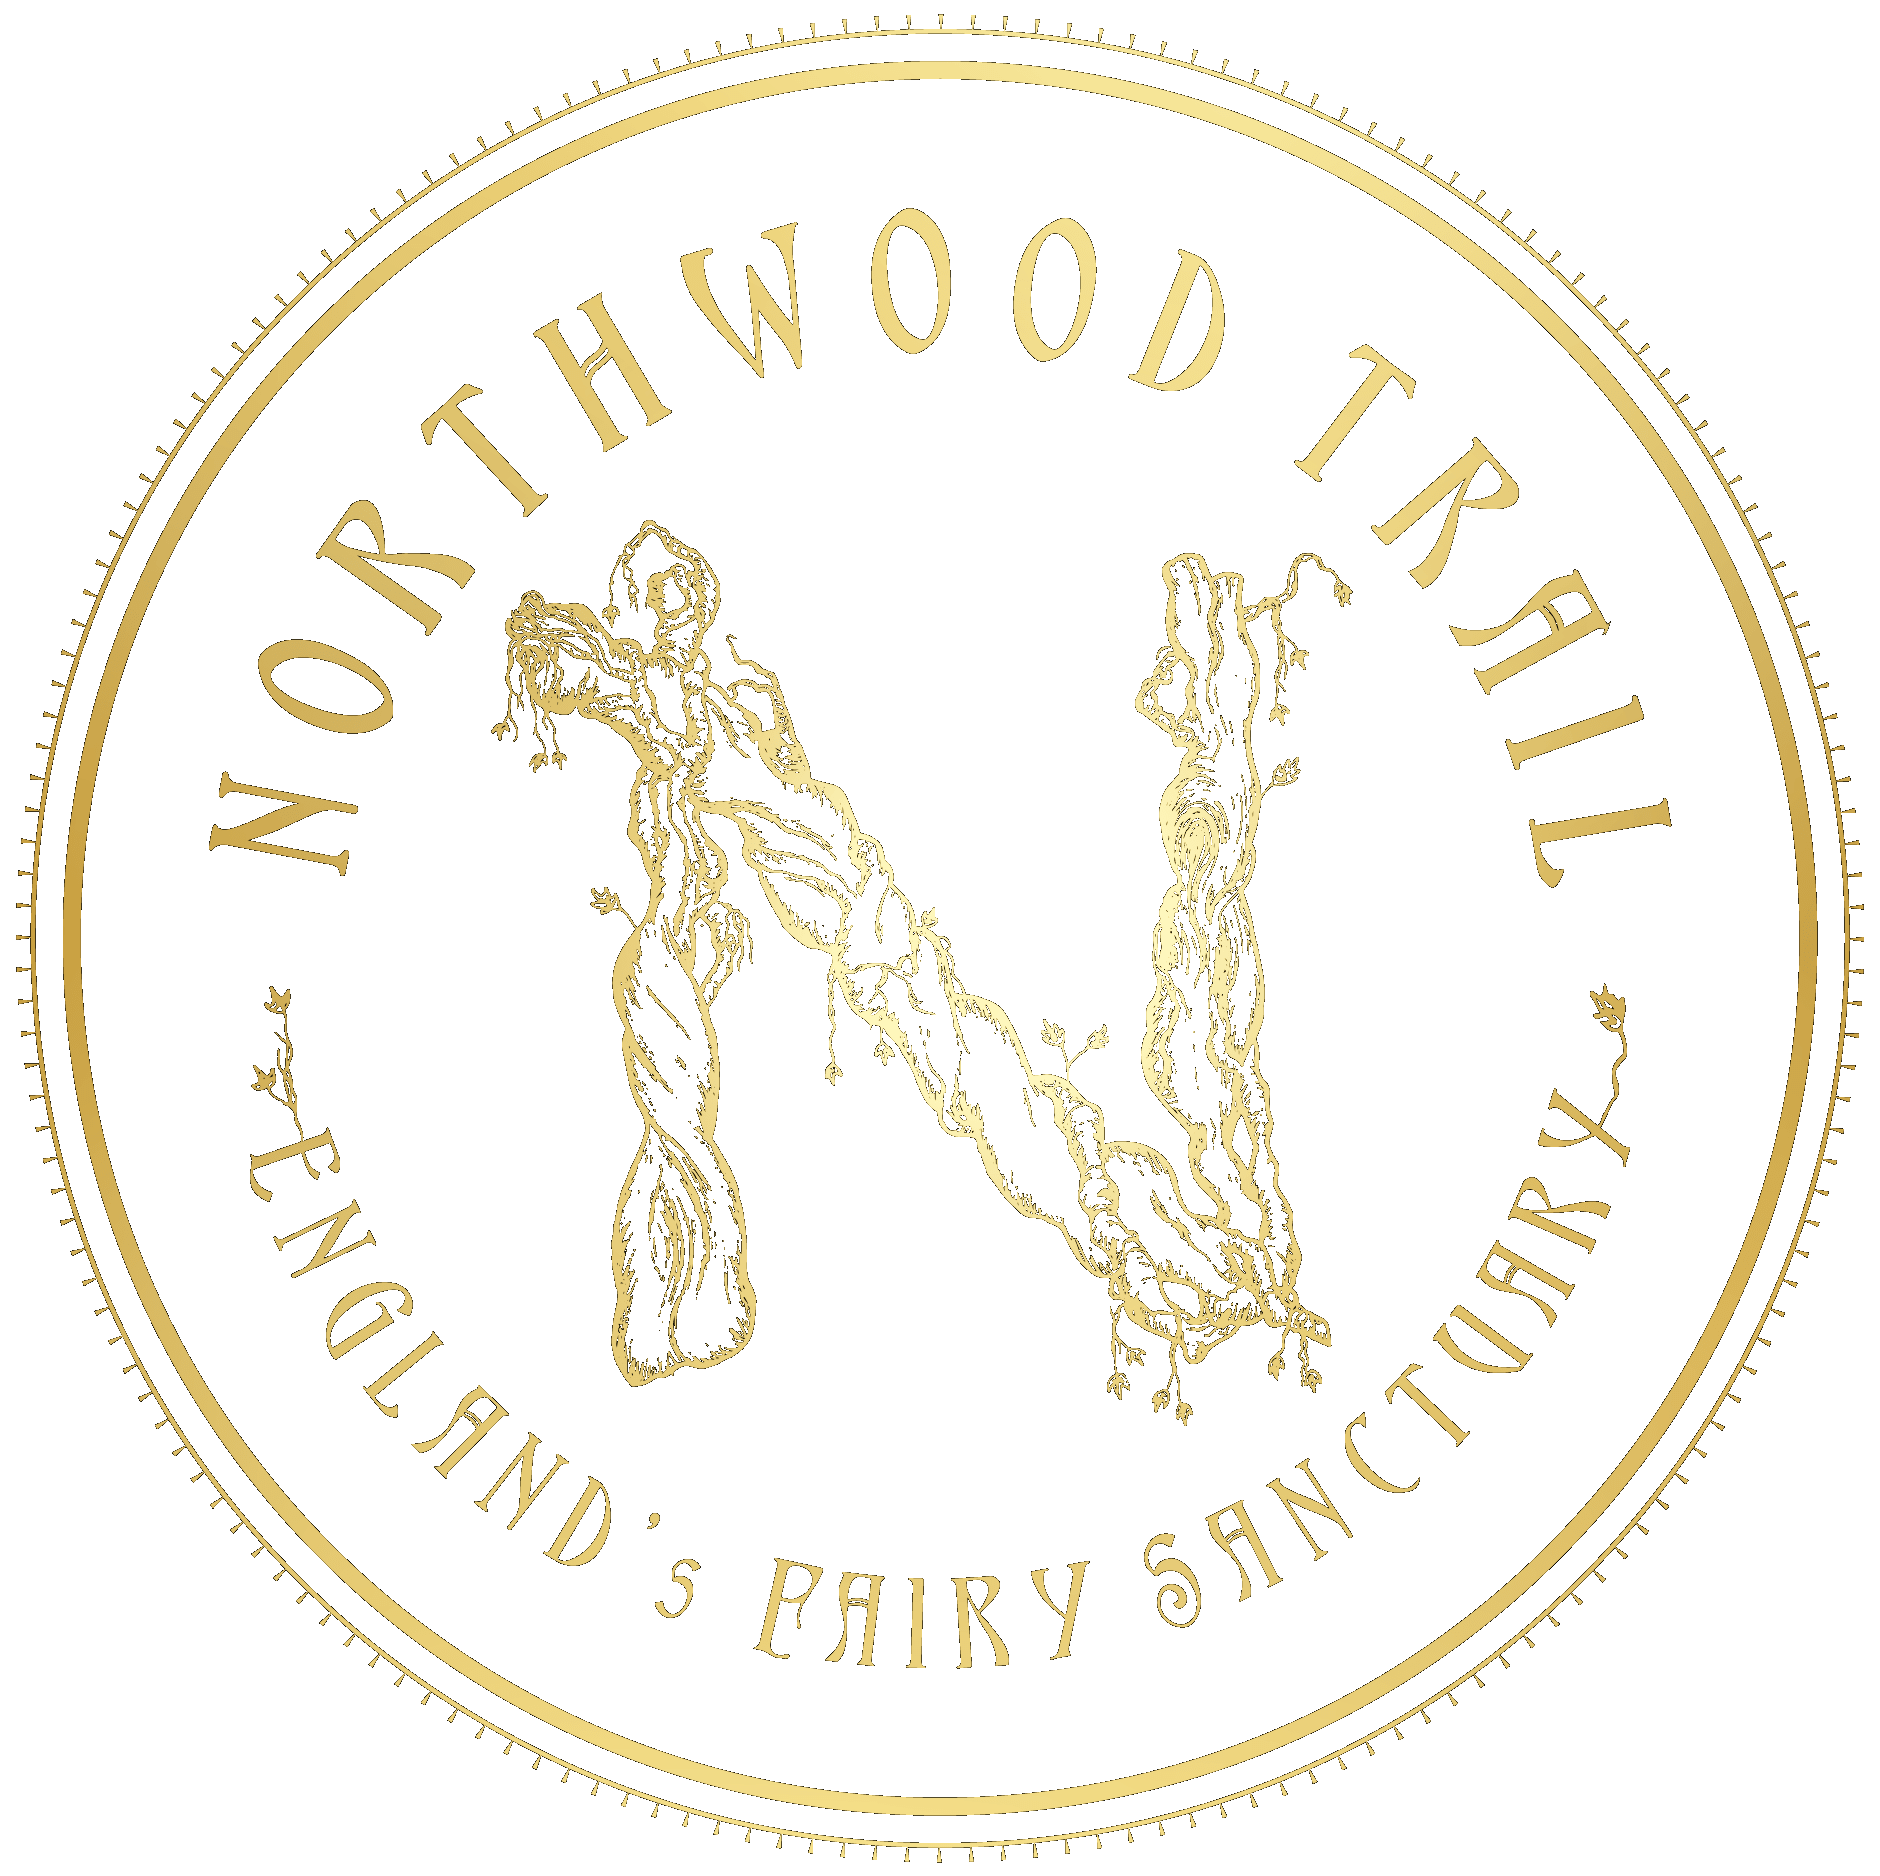 Easter events, Fairy wood near York, Northwood trail